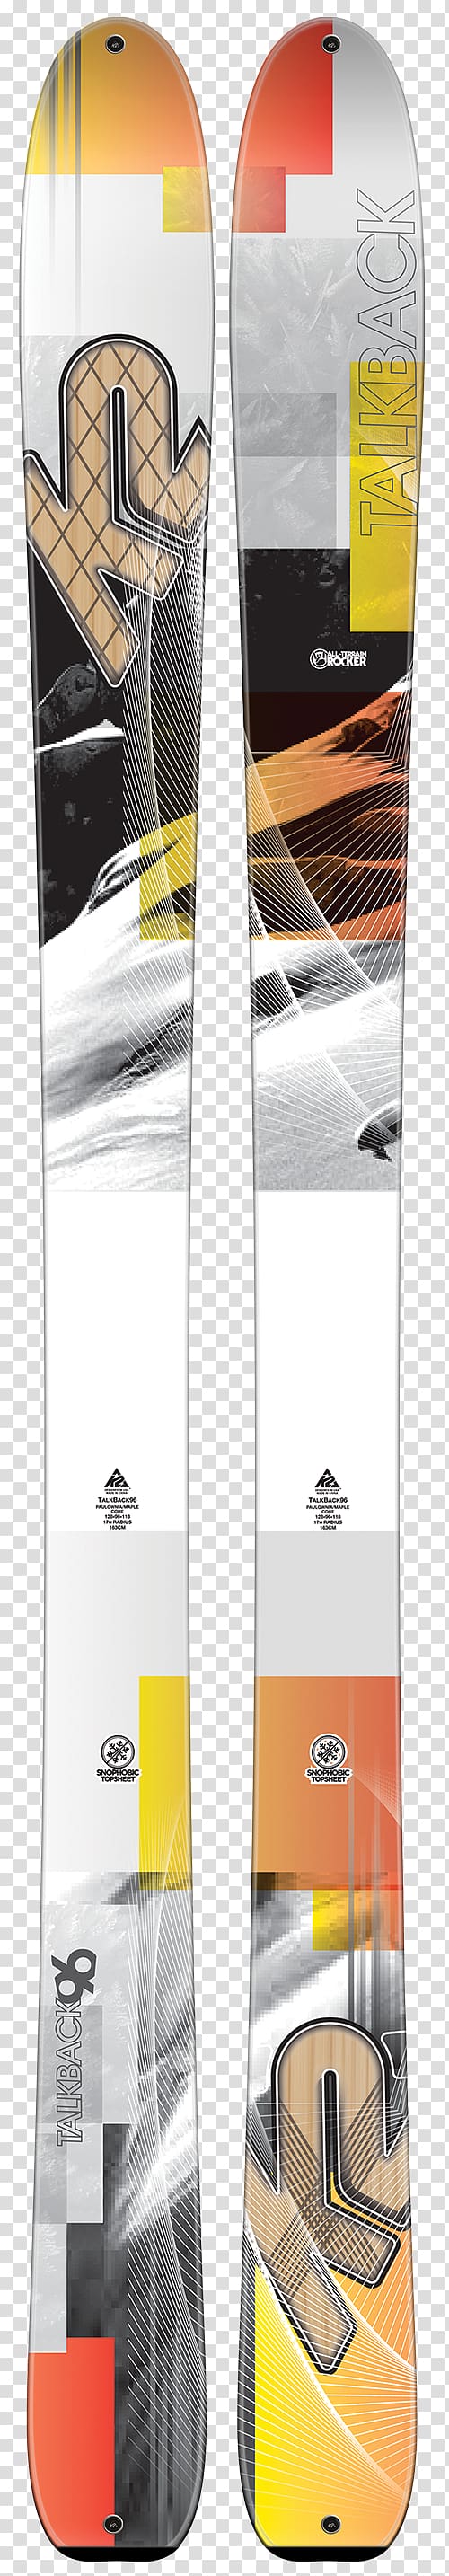 Snowboard Backcountry skiing K2 Sports Ski touring, snowboard transparent background PNG clipart